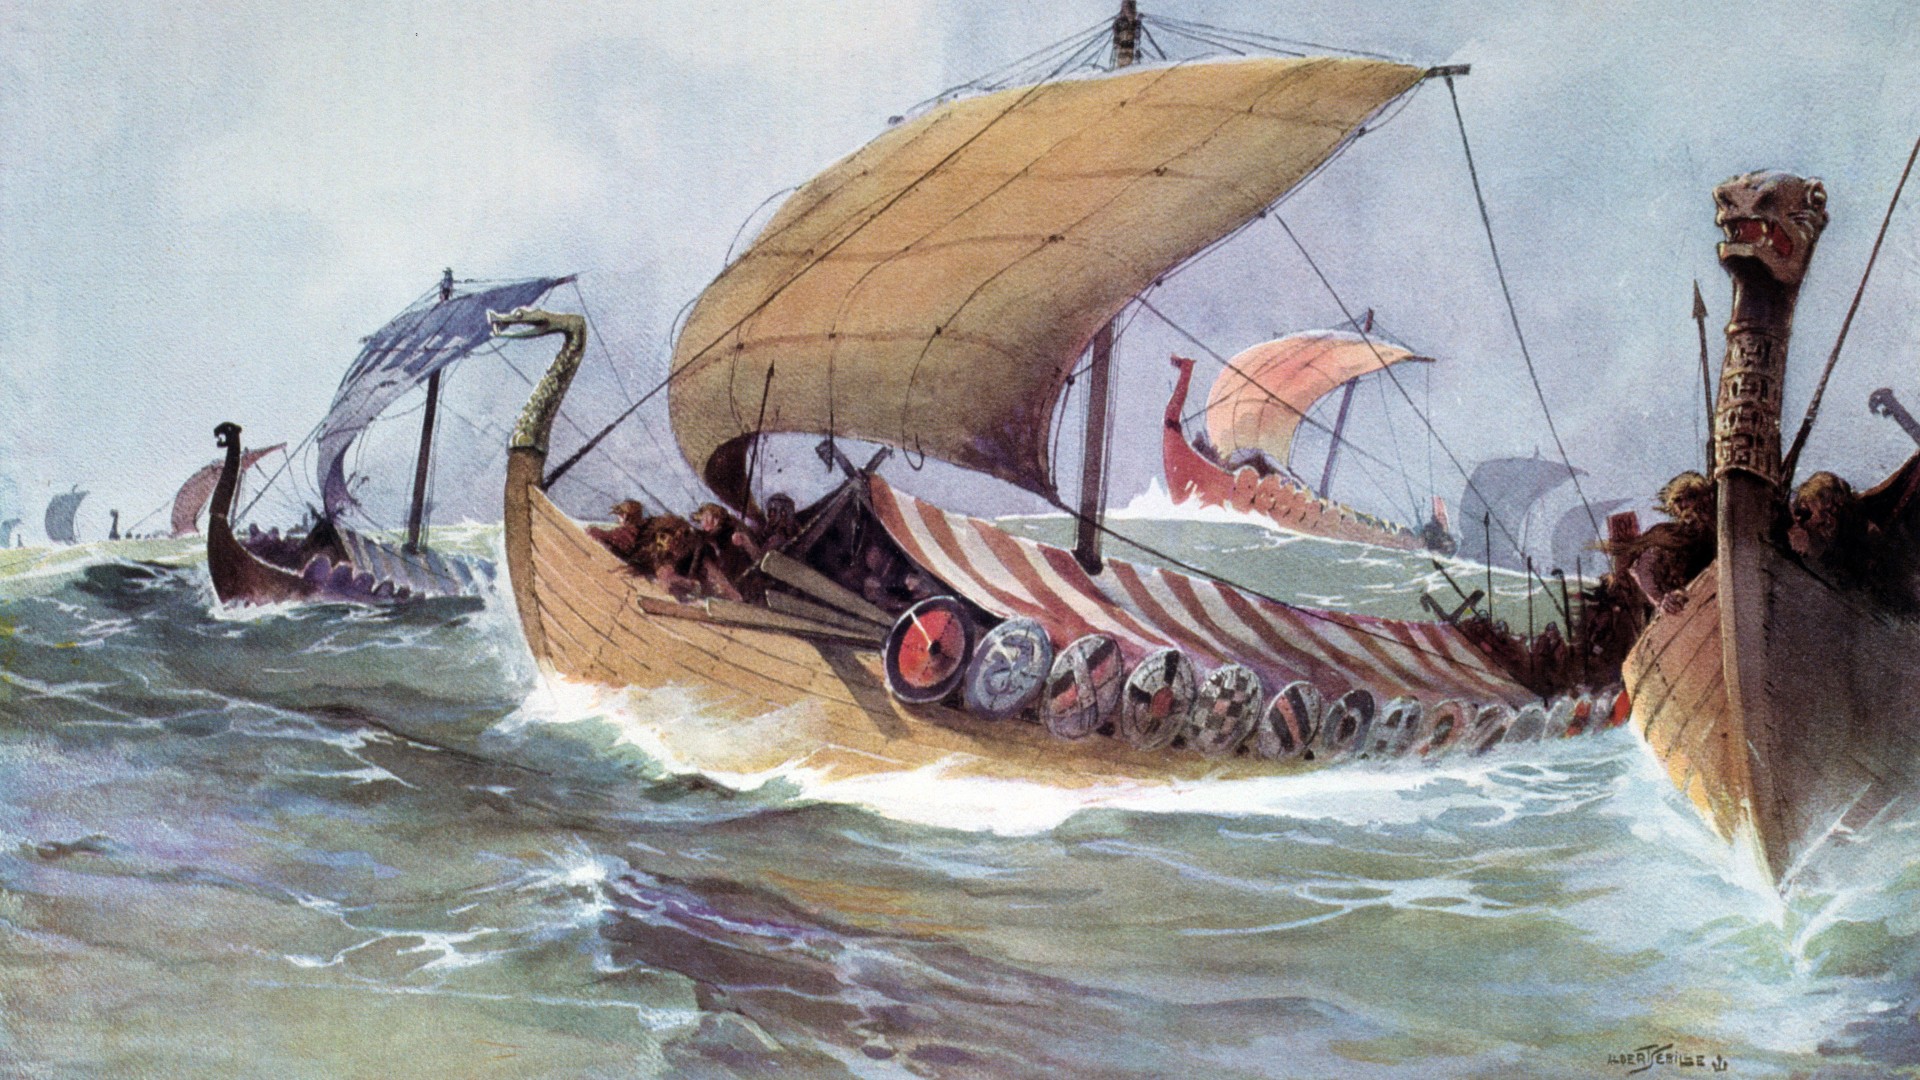 The Old Norse Spell Book: The Saga of Viking Warriors: Sailing the Seas of  Destiny: Viking Longships, Exploration, and the Legacy of the Shield